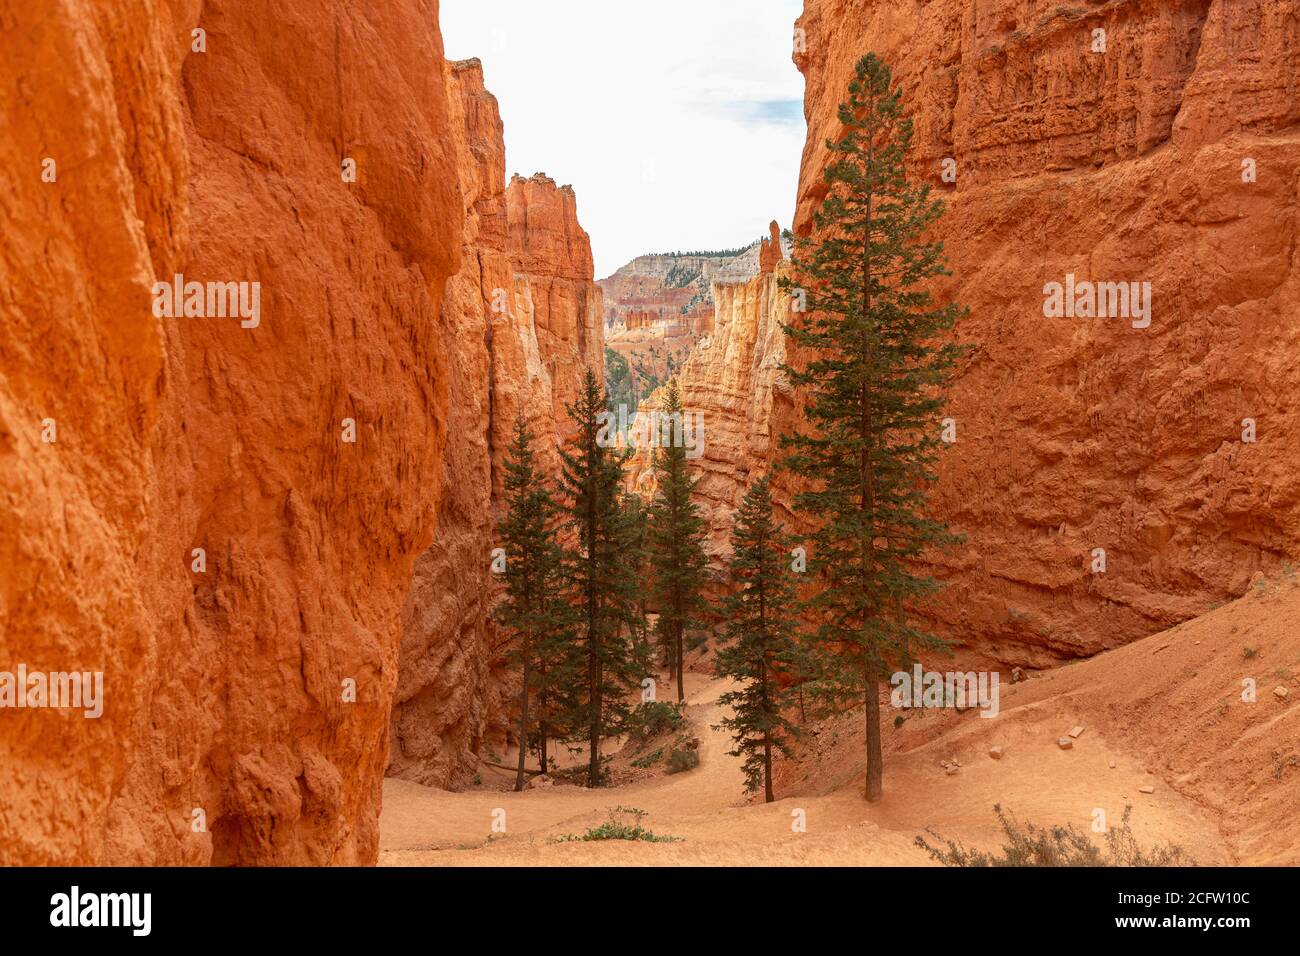 Row of Pine trees in tight canyon,  Bryce Canyon National Park, Utah, USA Stock Photo